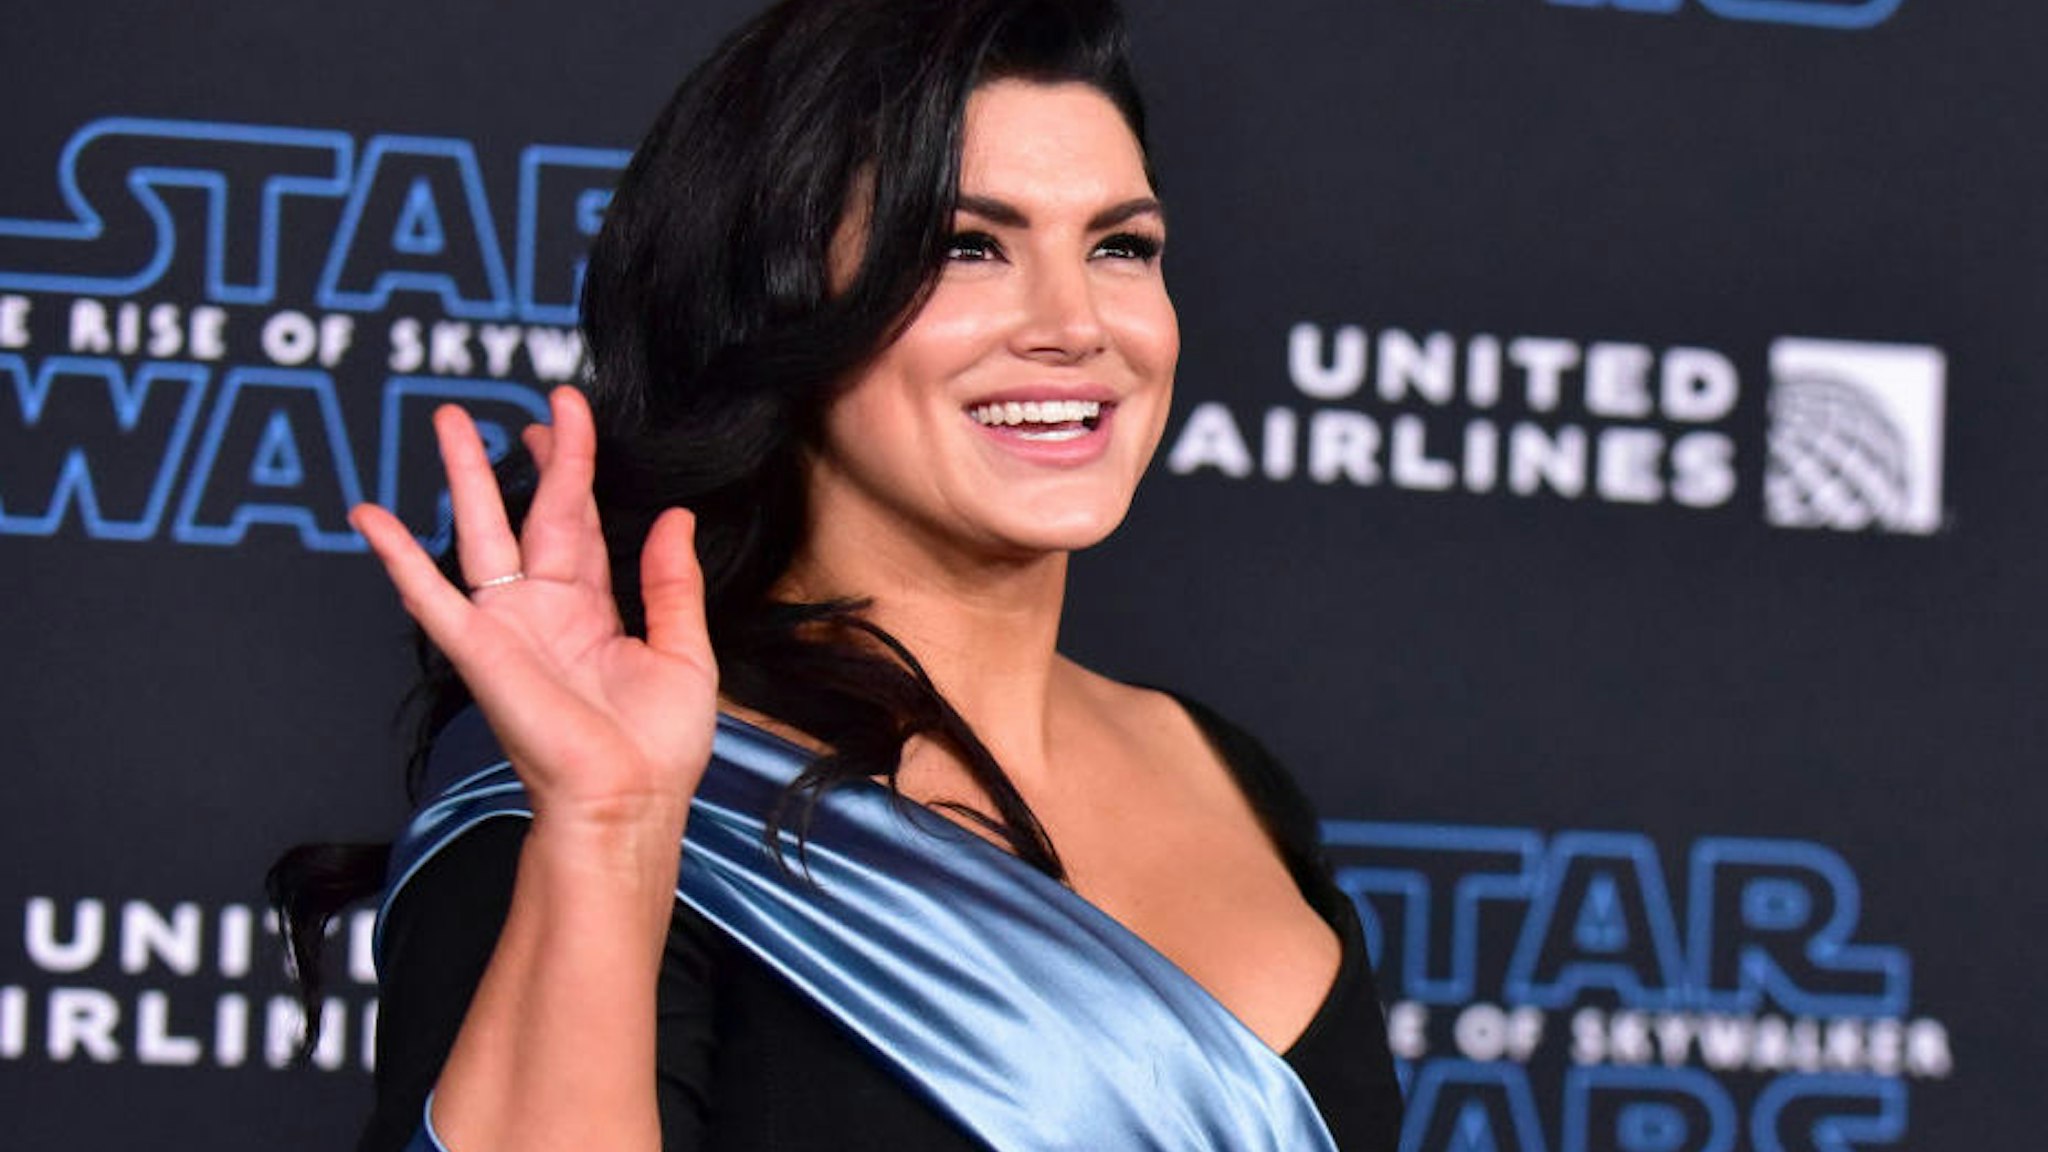 Gina Carano attends the Premiere of Disney's "Star Wars: The Rise Of Skywalker" on December 16, 2019 in Hollywood, California.